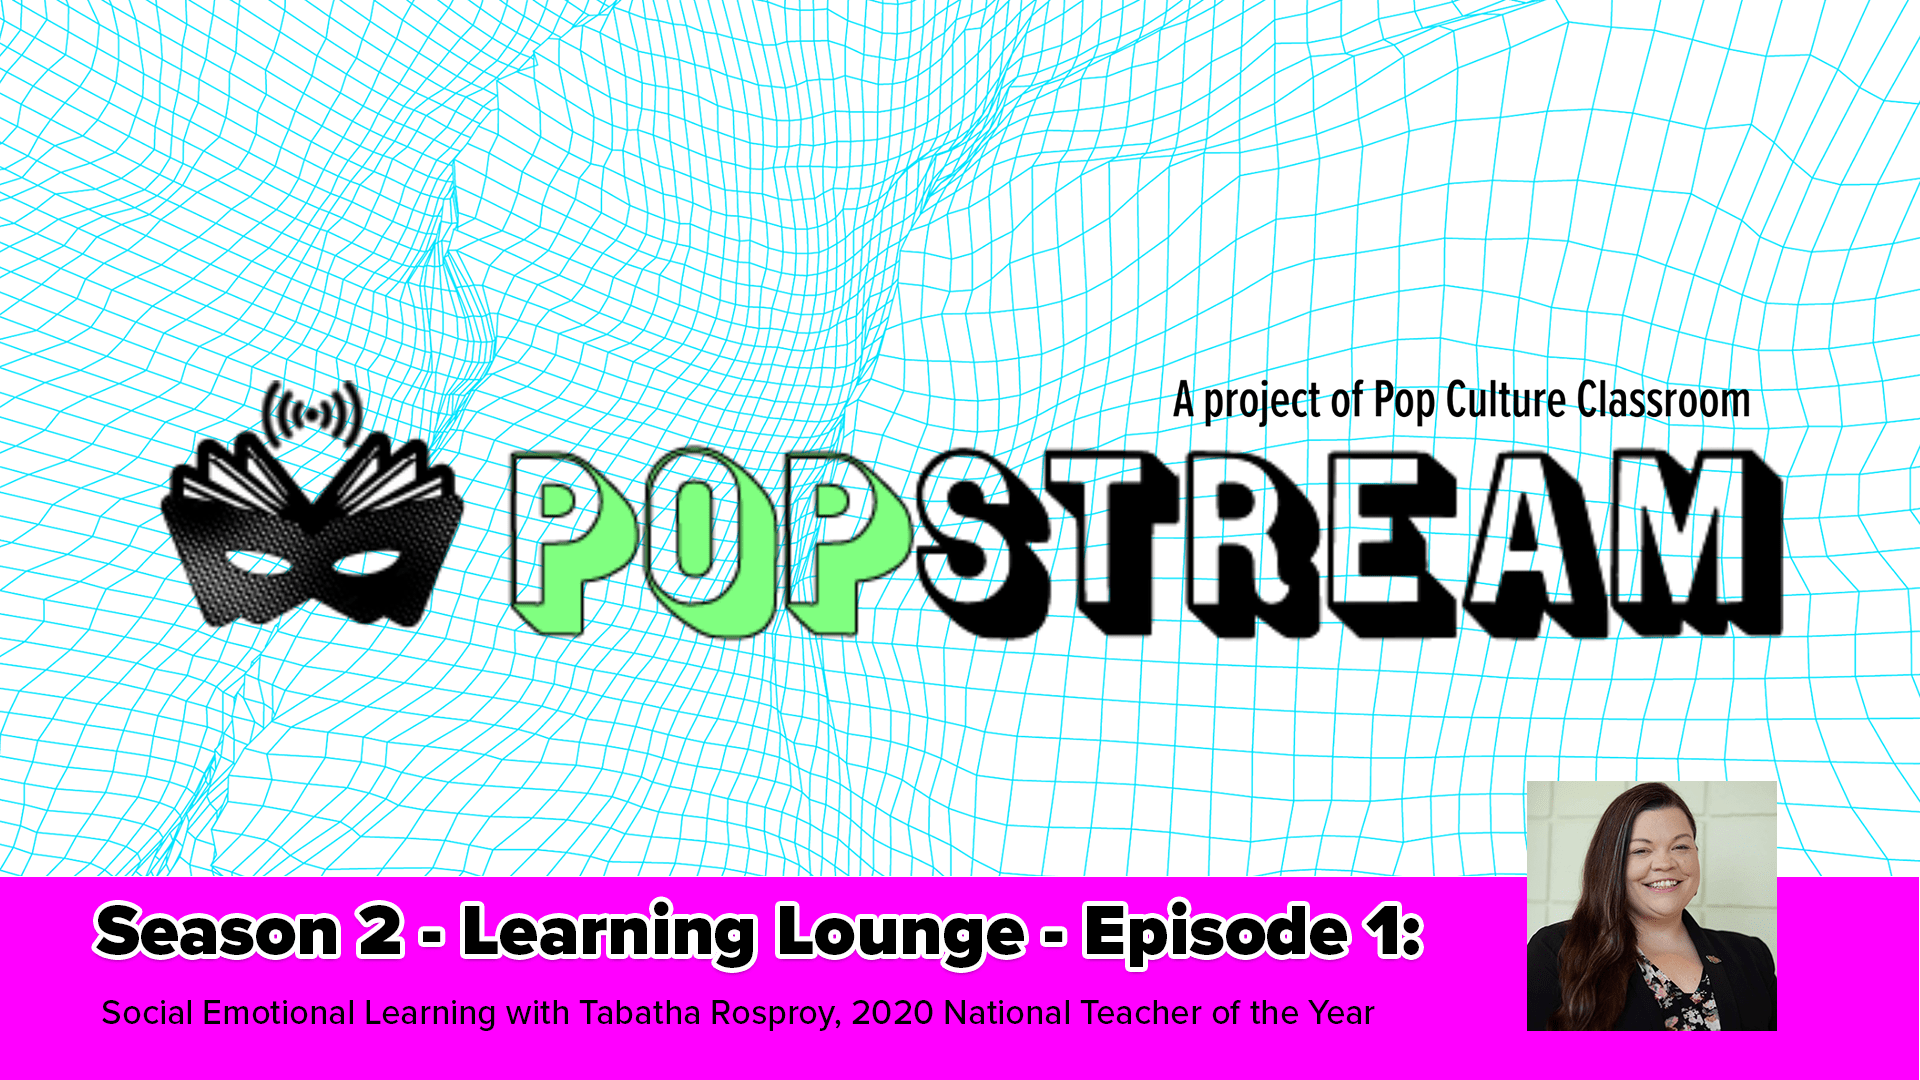 PopStream Learning Lounge - Episode 1, featuring Tabatha Rosproy, 2020 National Teacher of the Year